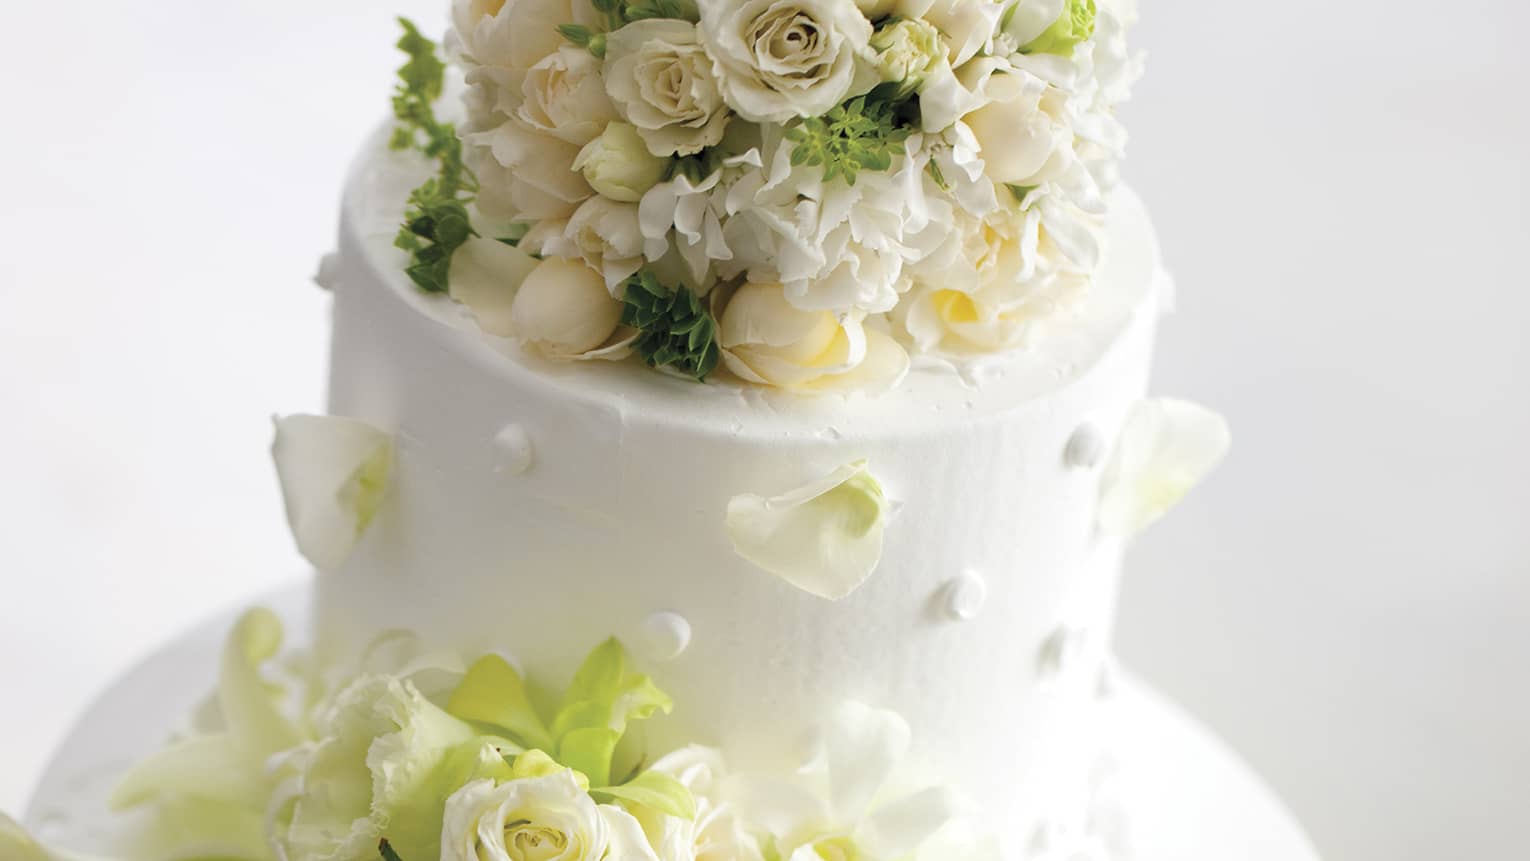 Tiered wedding cake decorated with white roses